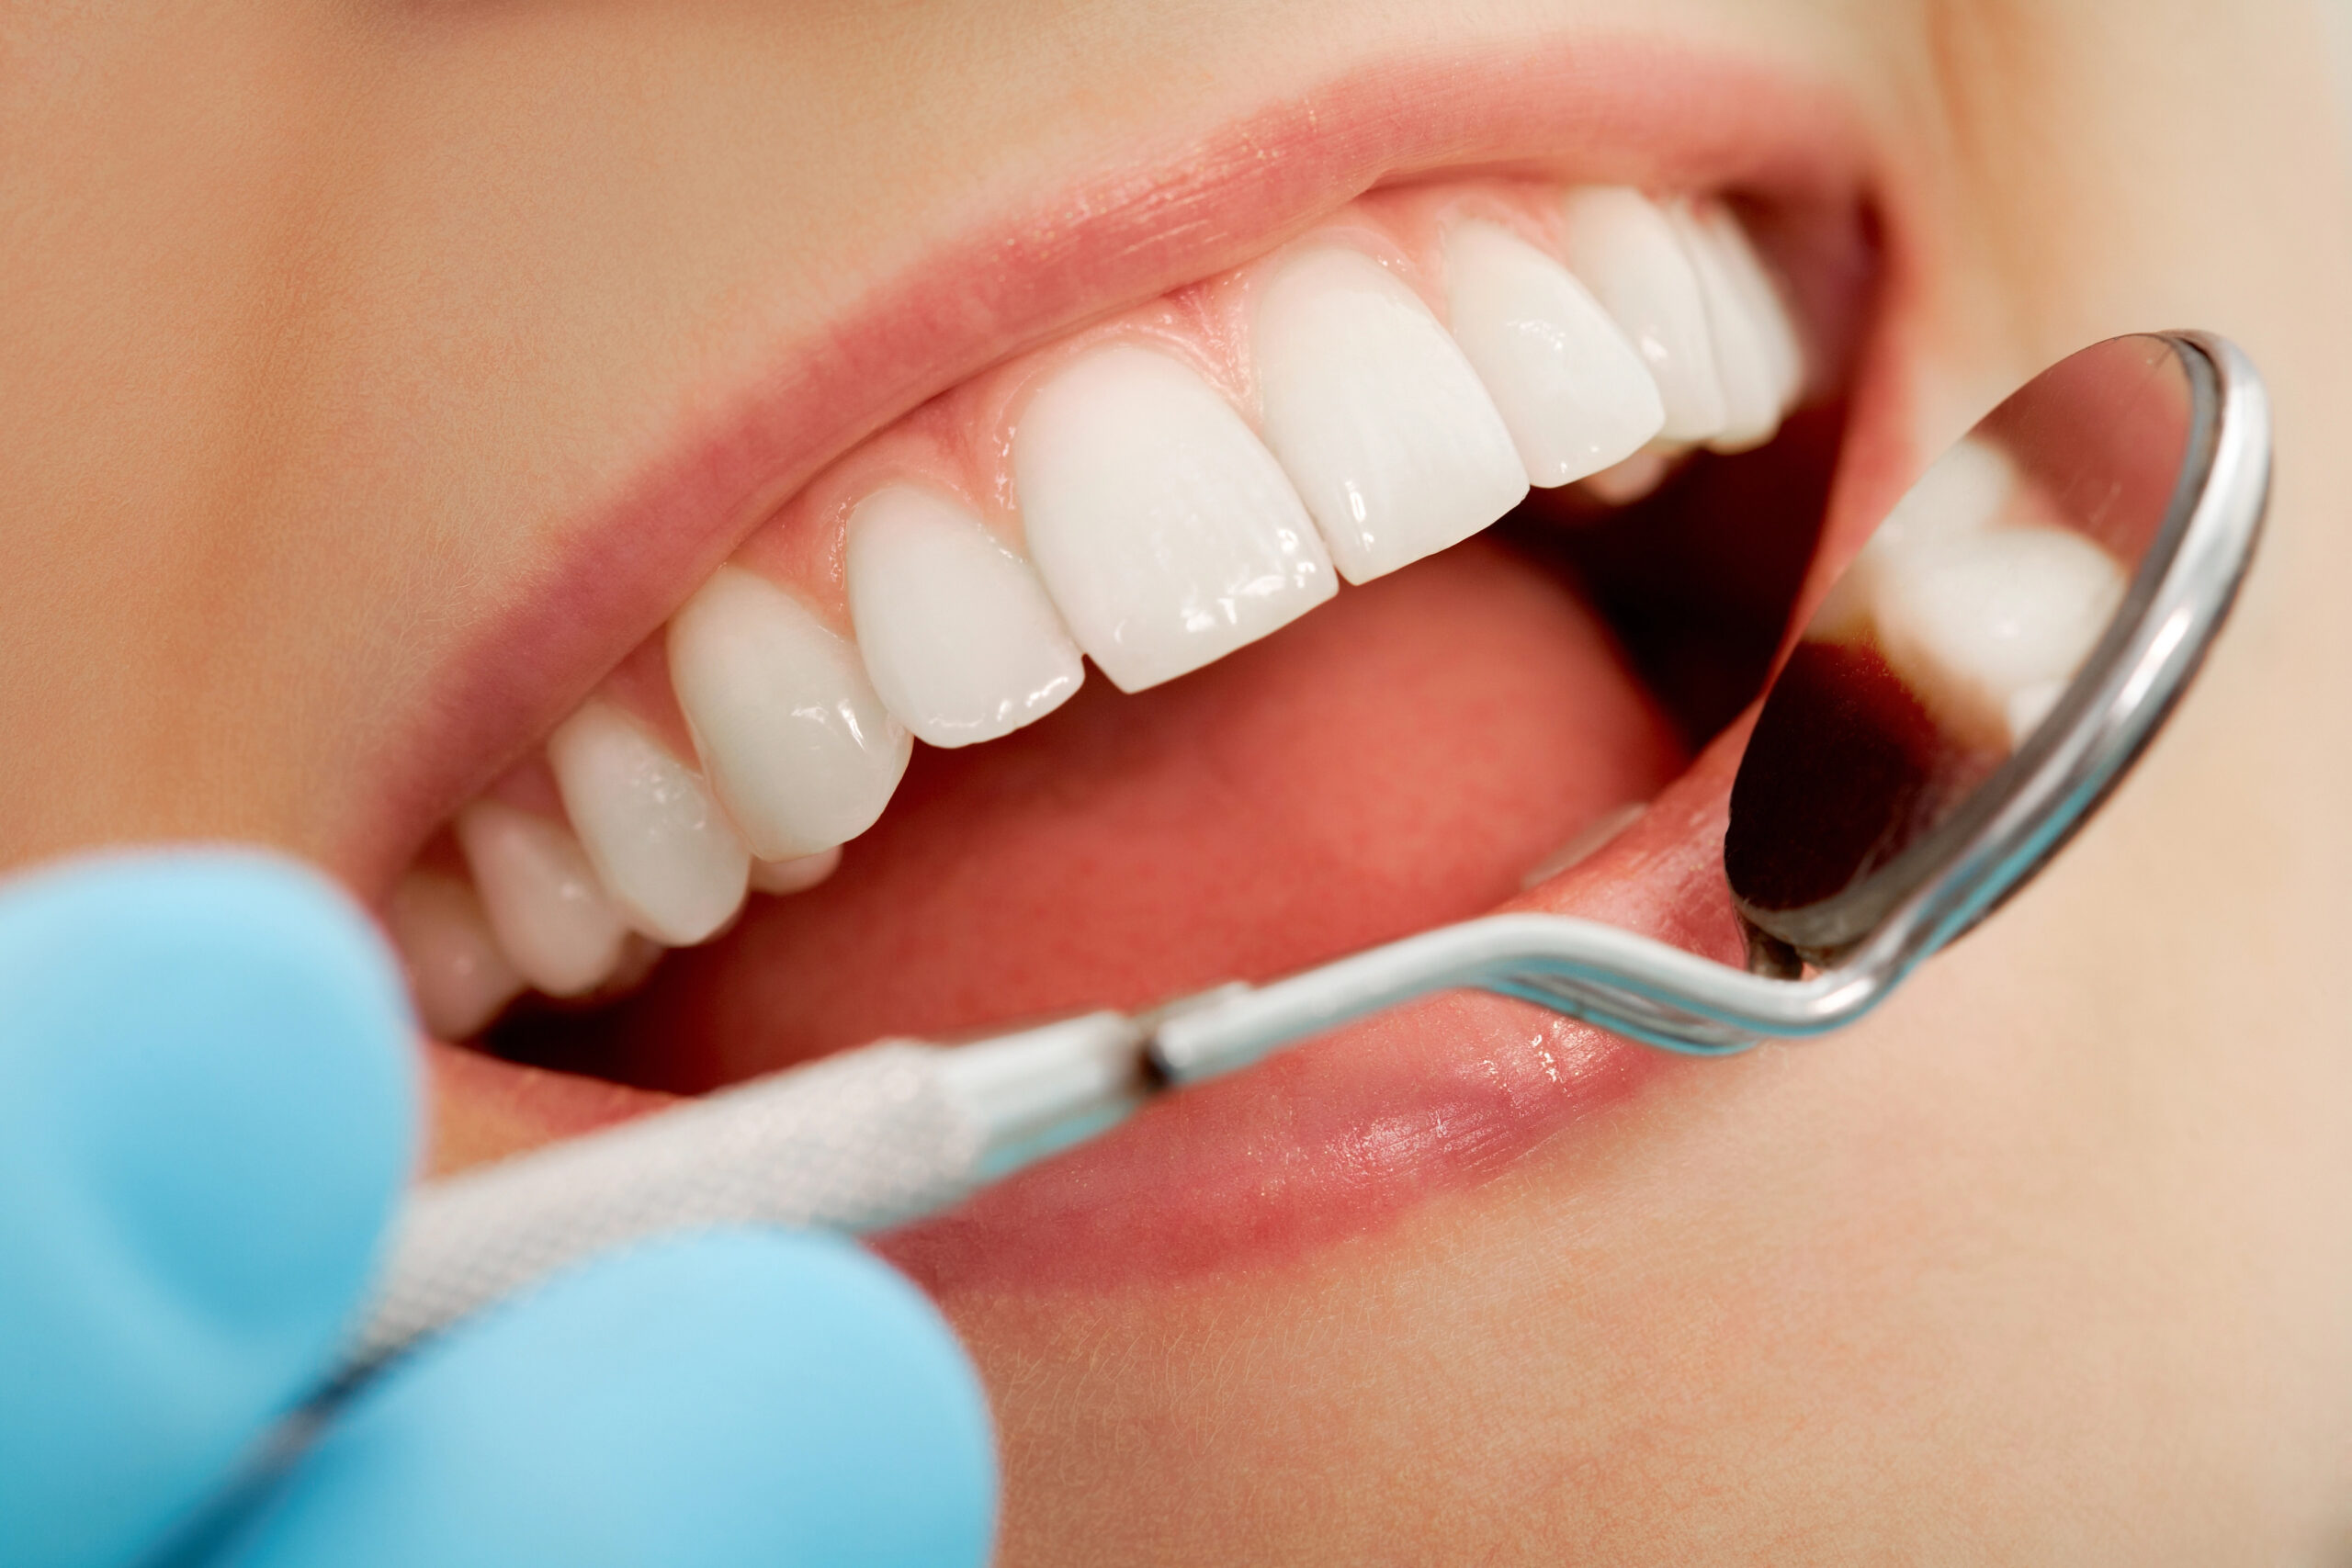 Remove calculus from your teeth in Hendersonville, NC